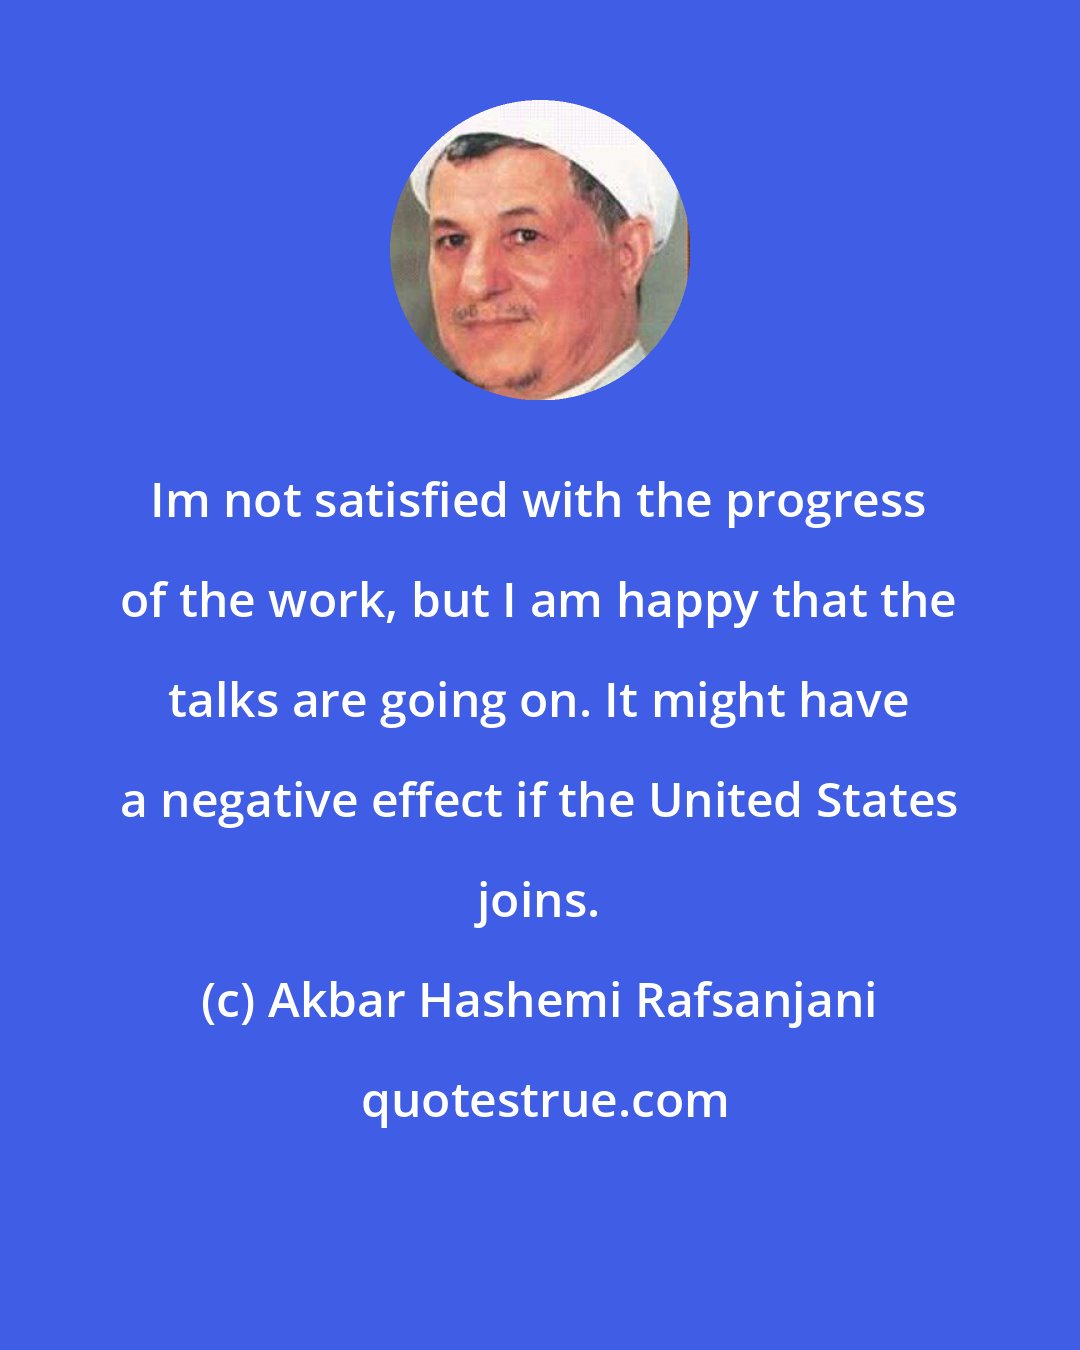 Akbar Hashemi Rafsanjani: Im not satisfied with the progress of the work, but I am happy that the talks are going on. It might have a negative effect if the United States joins.